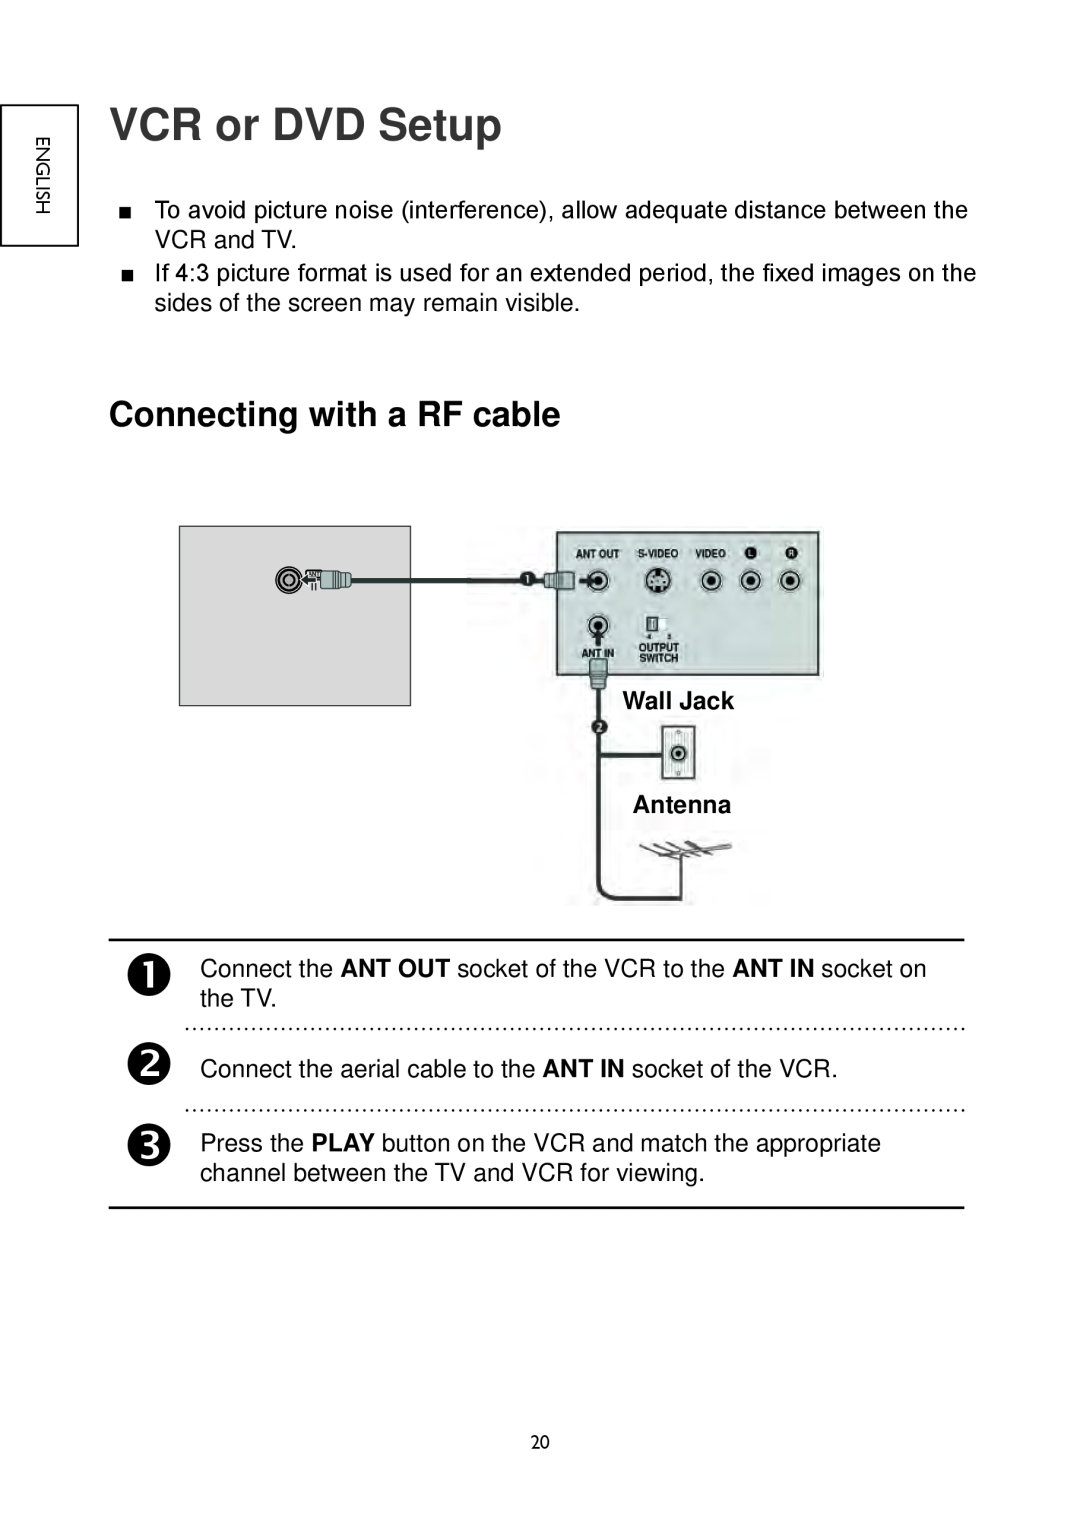 Hitachi 32LD4550C, 32LD4550U, 26LD4550C, 22LD4550C, 19LD4550U VCR or DVD Setup, Connecting with a RF cable, Wall Jack Antenna 